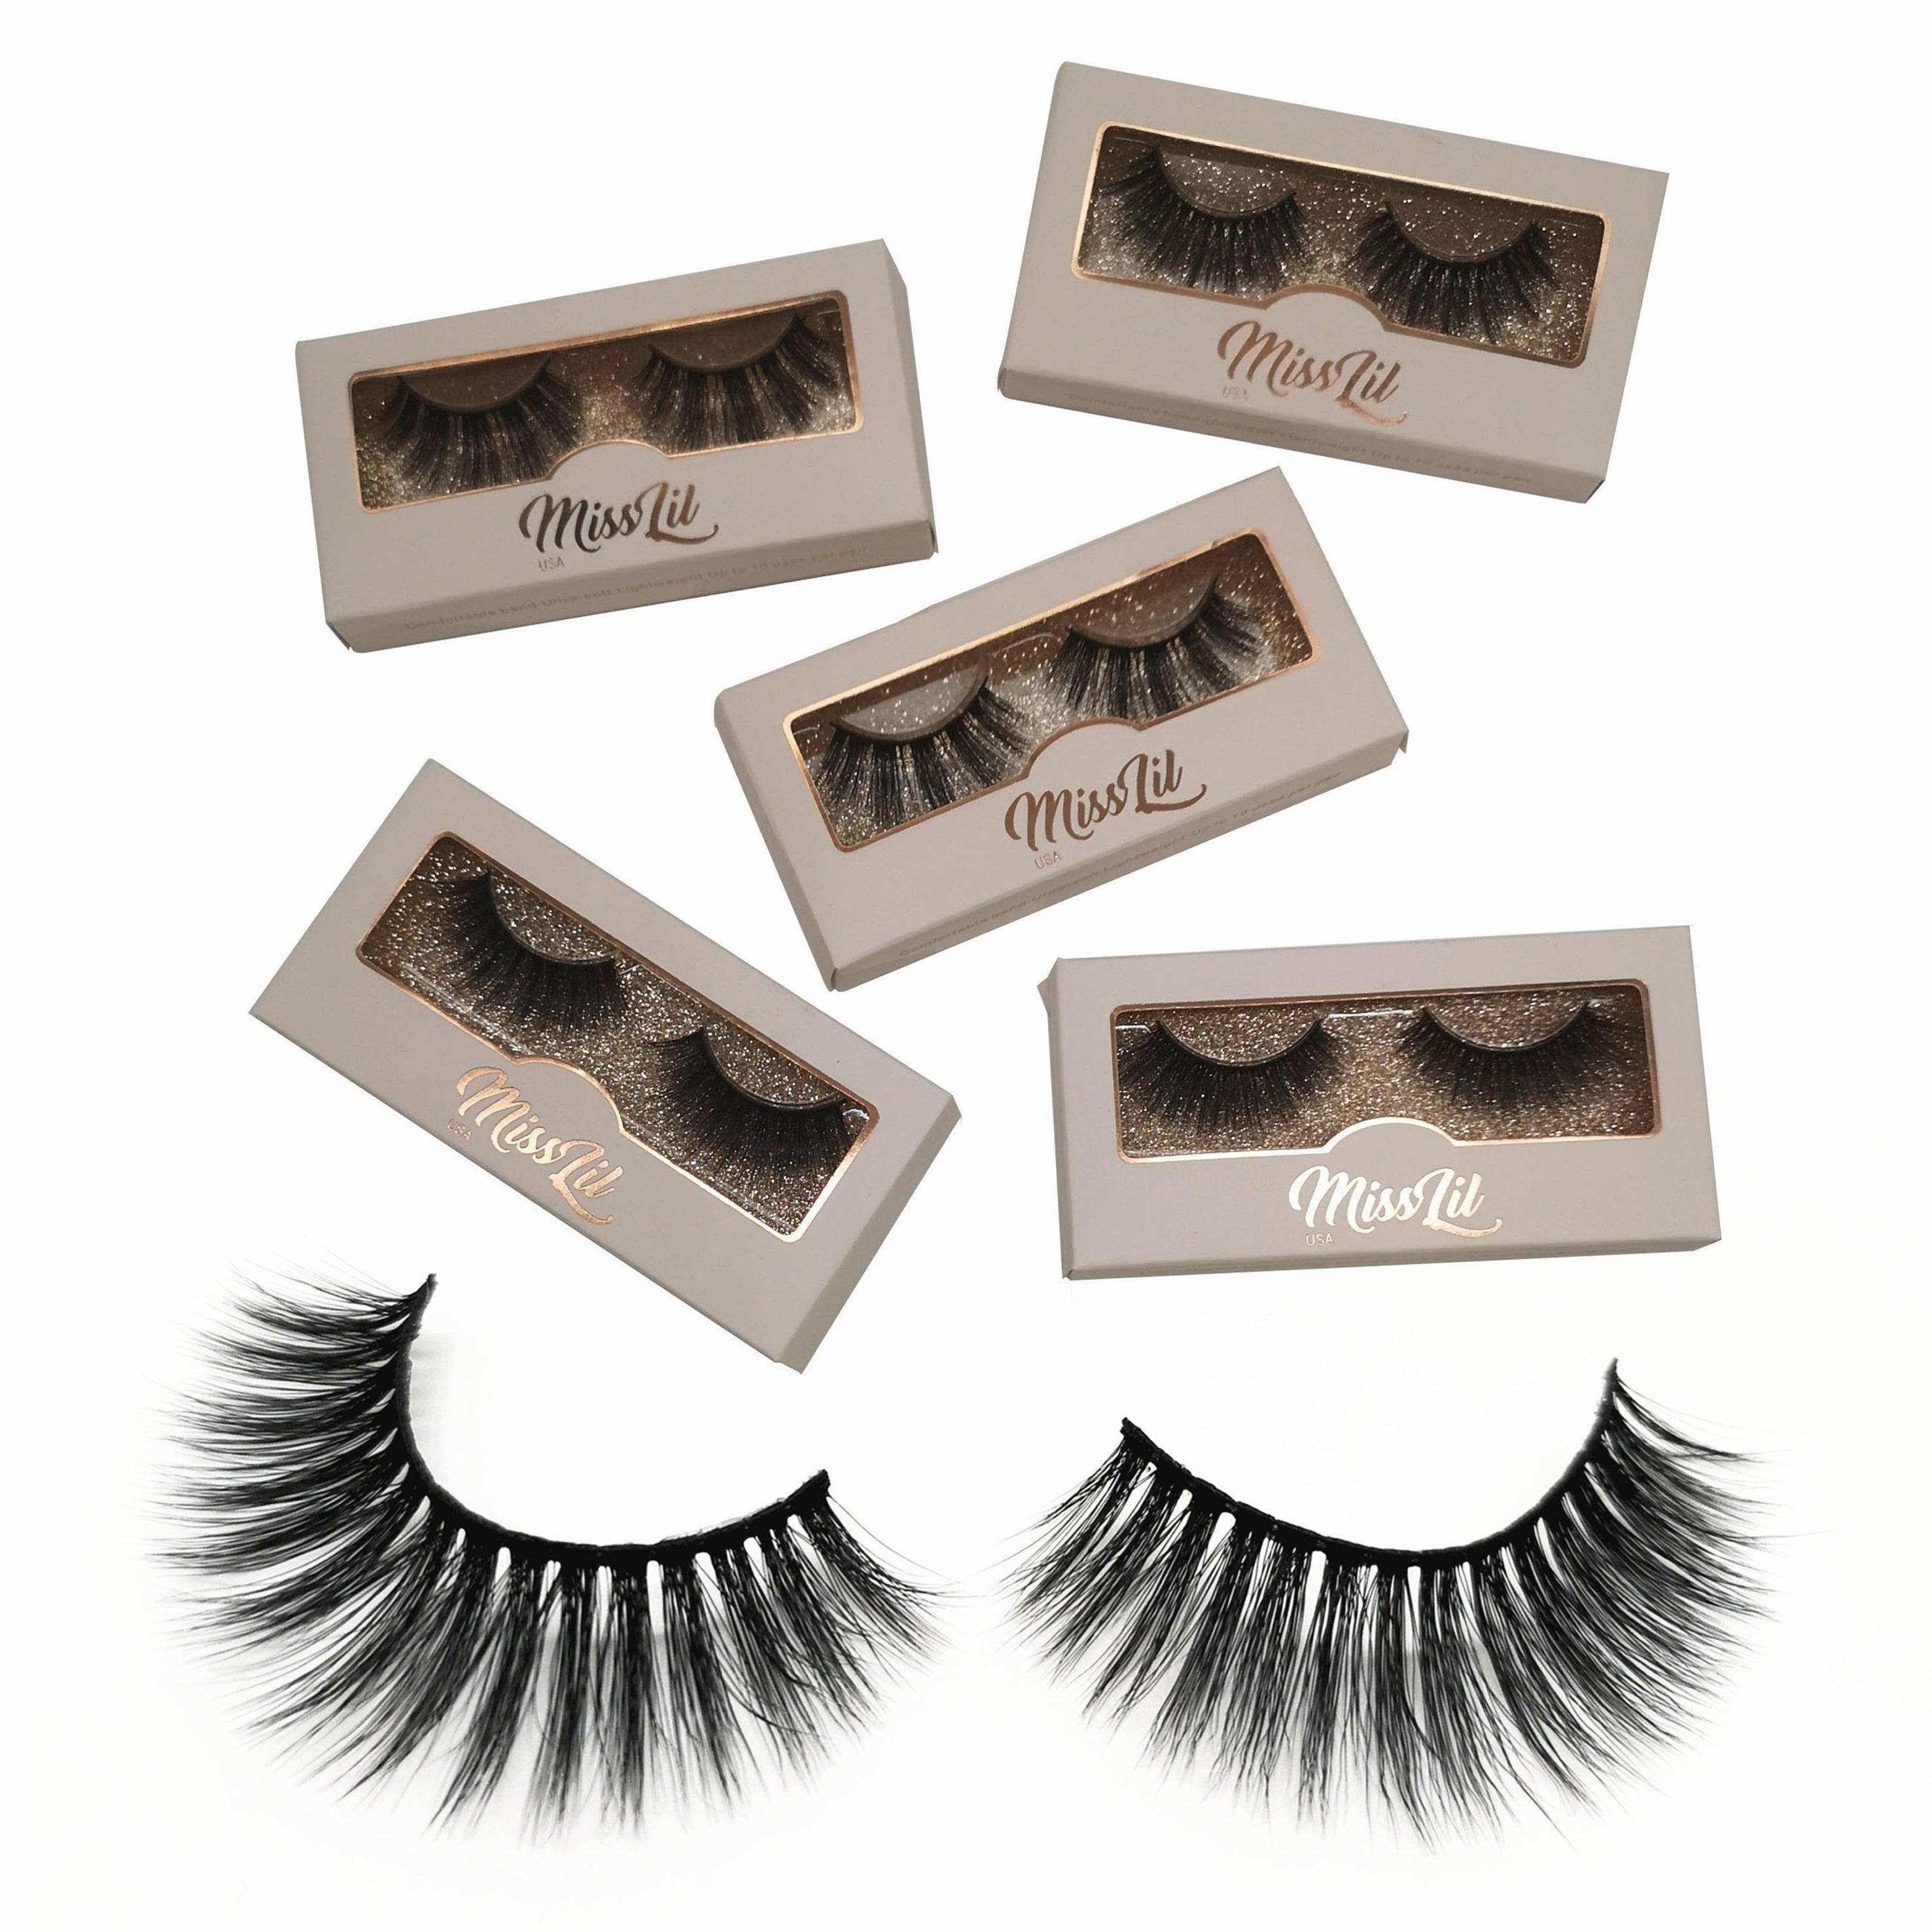 1 Pair Miss Lil USA Lashes #30 (Pack of 12) - Miss Lil USA Wholesale